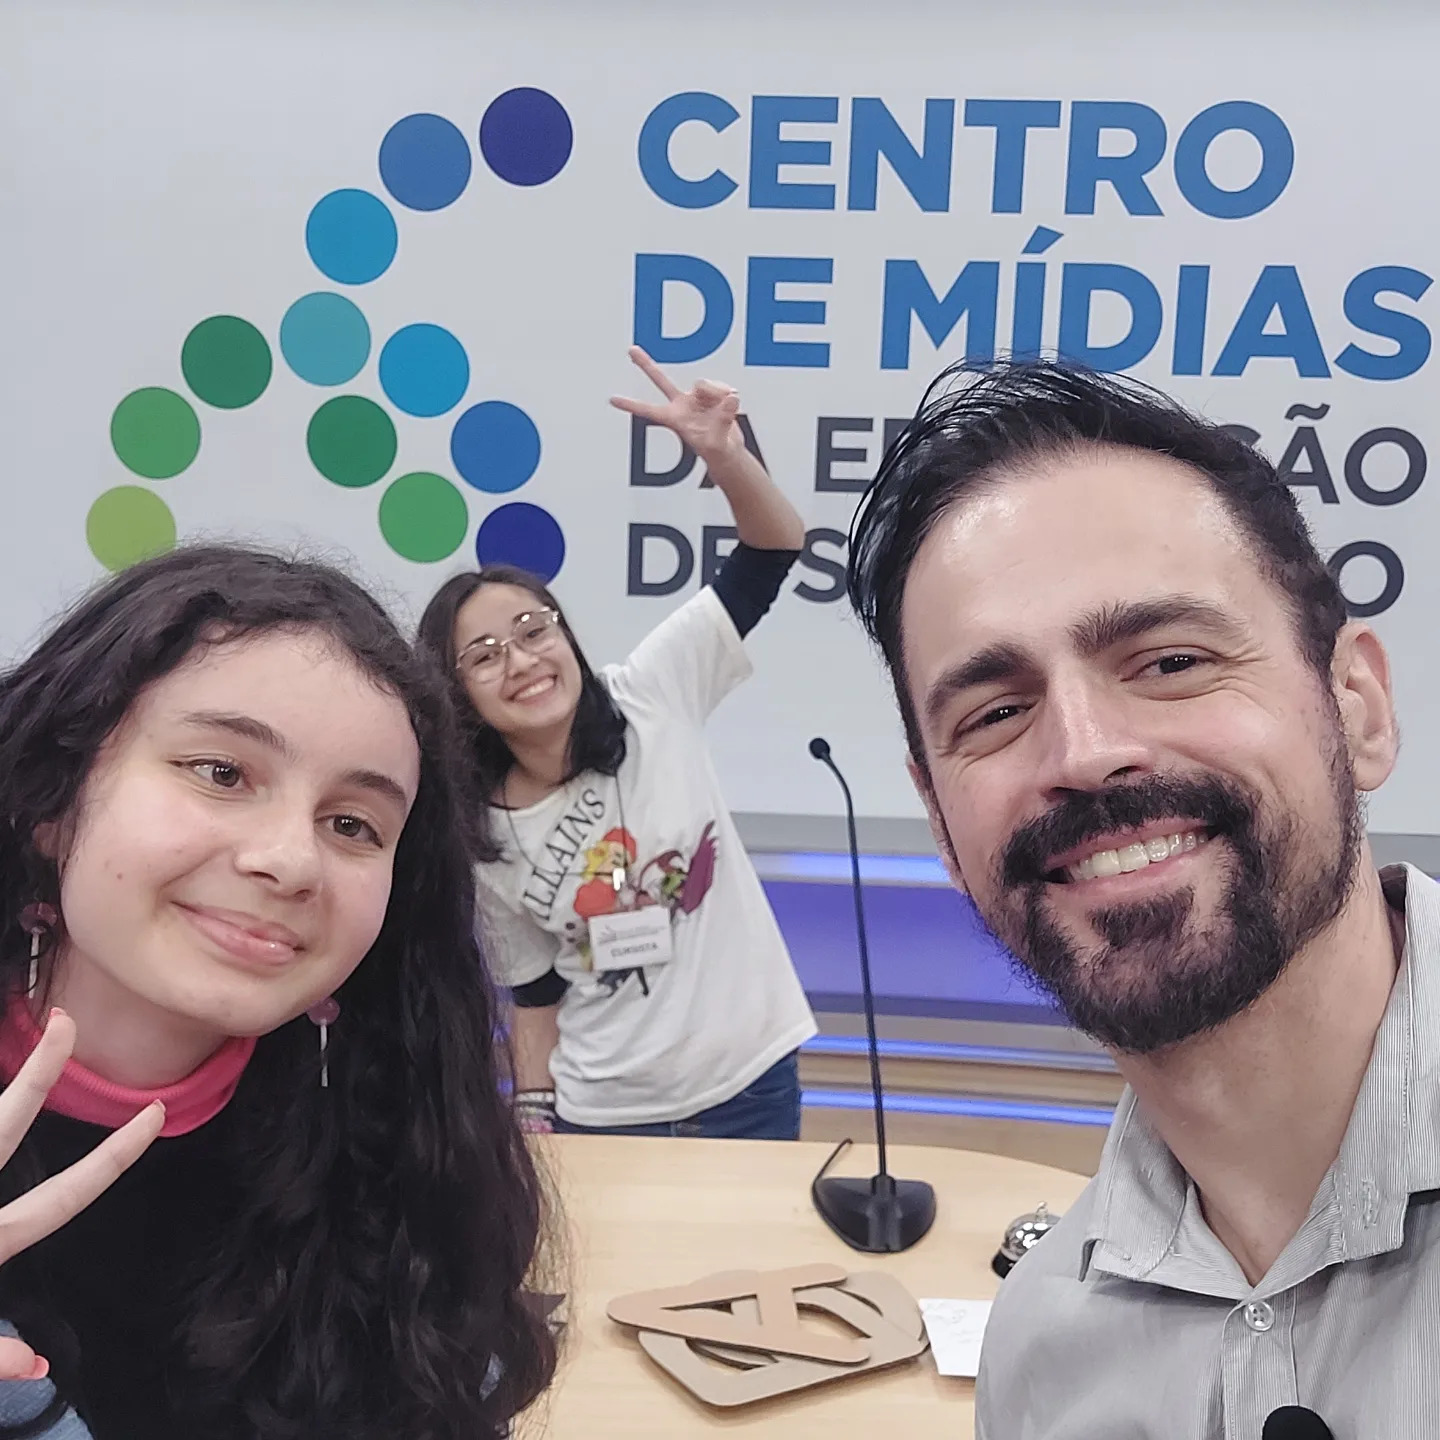 Students Aline M. and Natália C. with teacher Ed Gomes Jr. take a selfie in front of a Centro de Mídias sign 